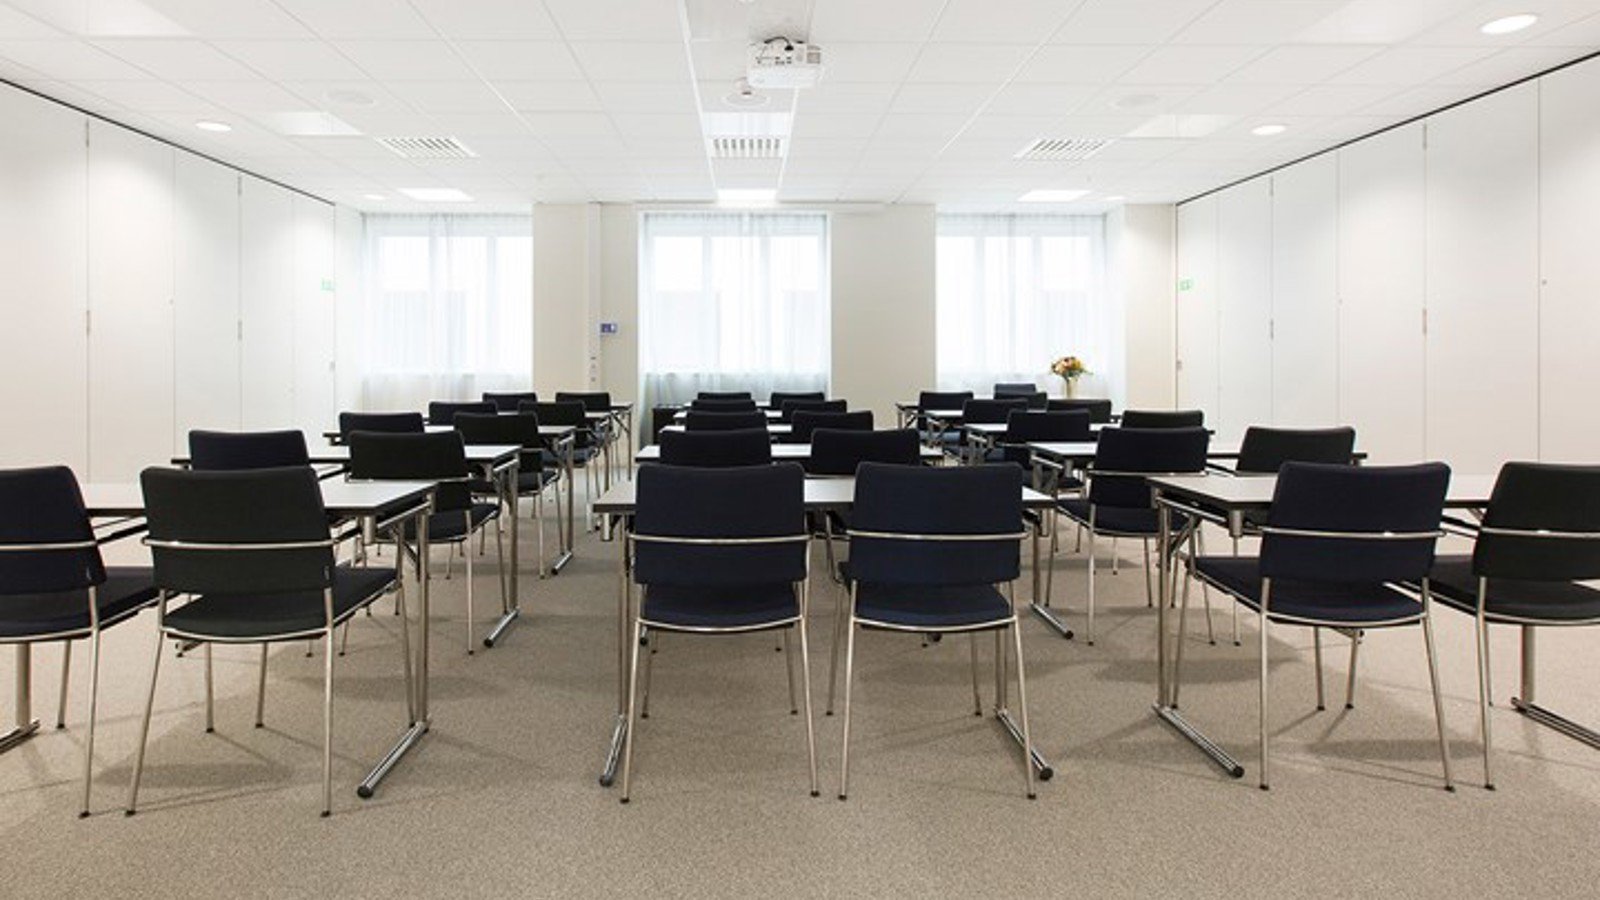 Conference room with school seating, white walls and black chairs